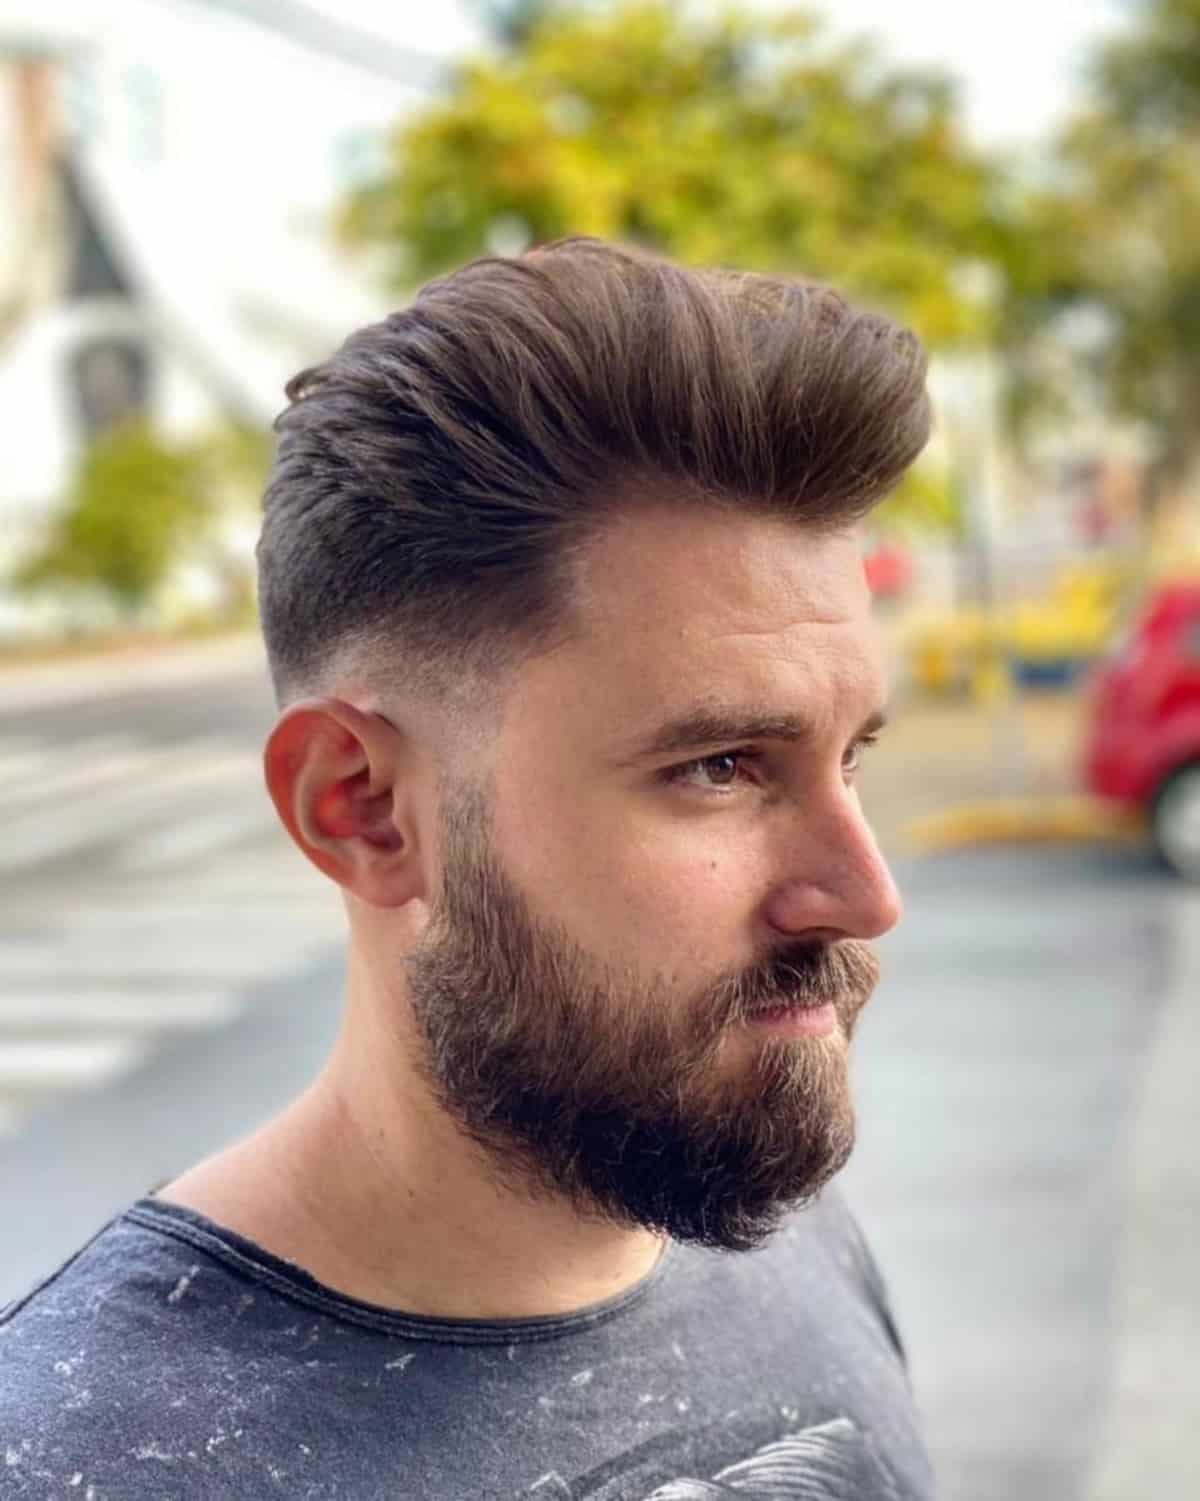 Messy pompadour with low fade